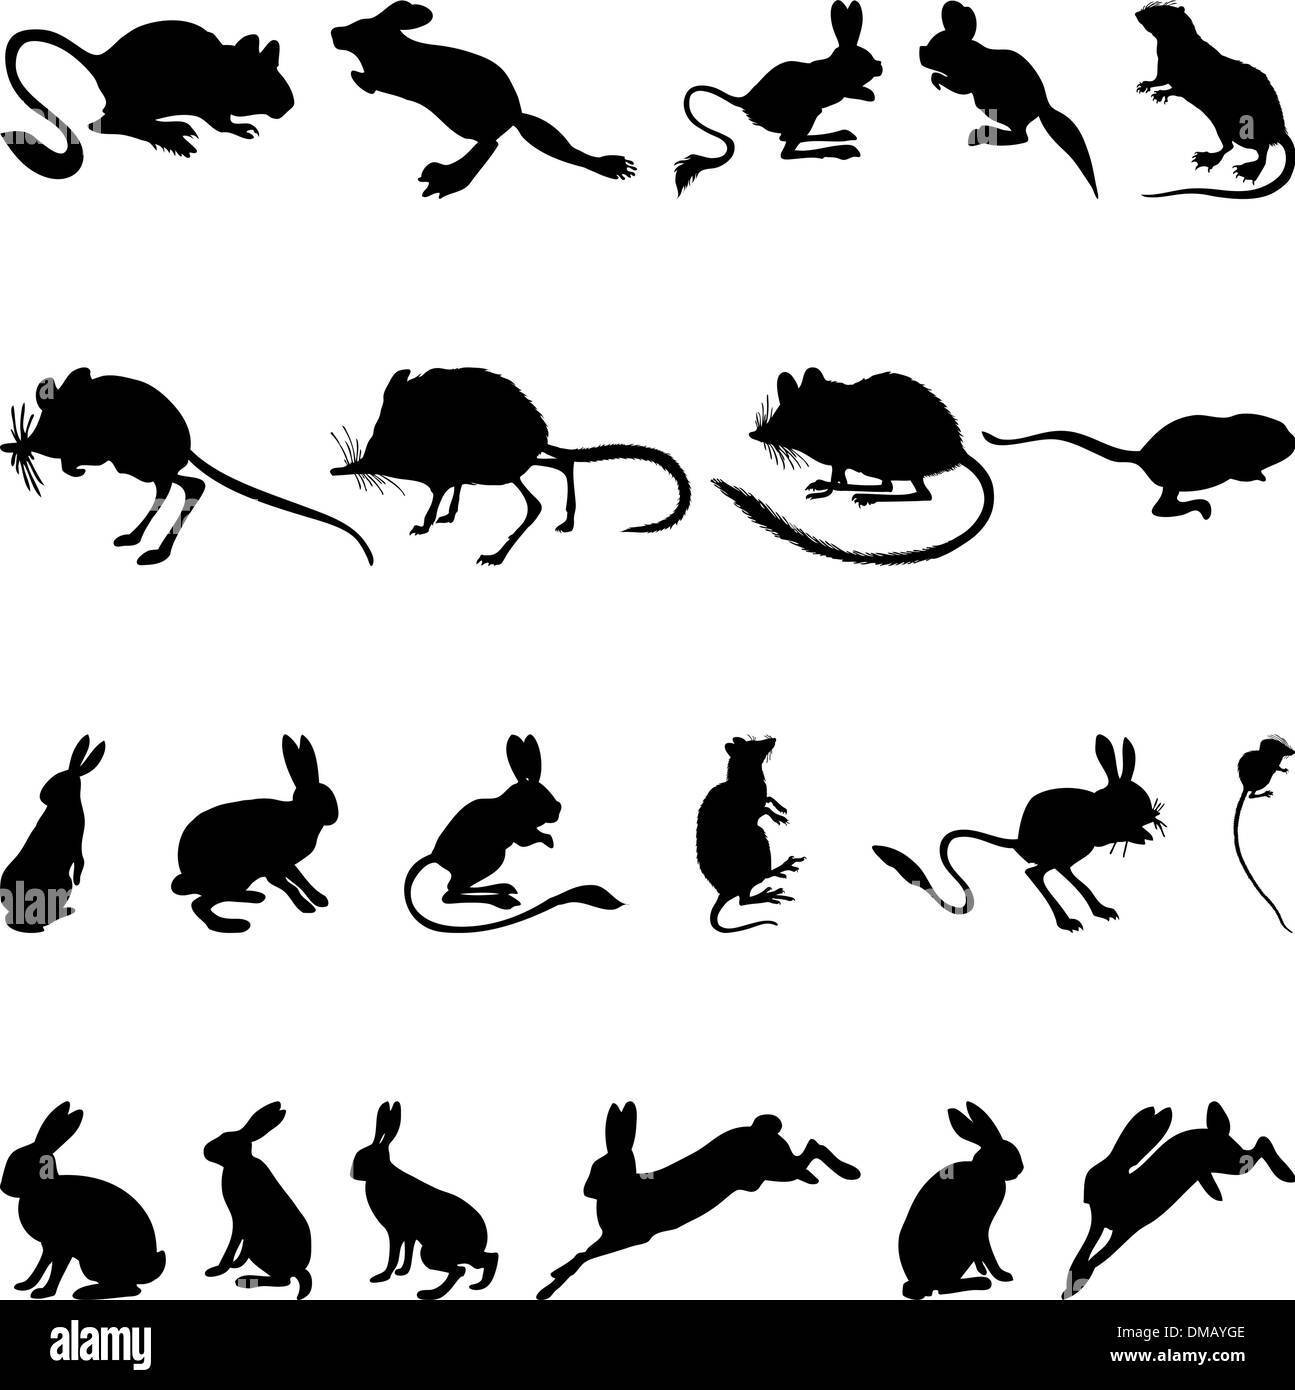 rodents silhouettes Stock Vector